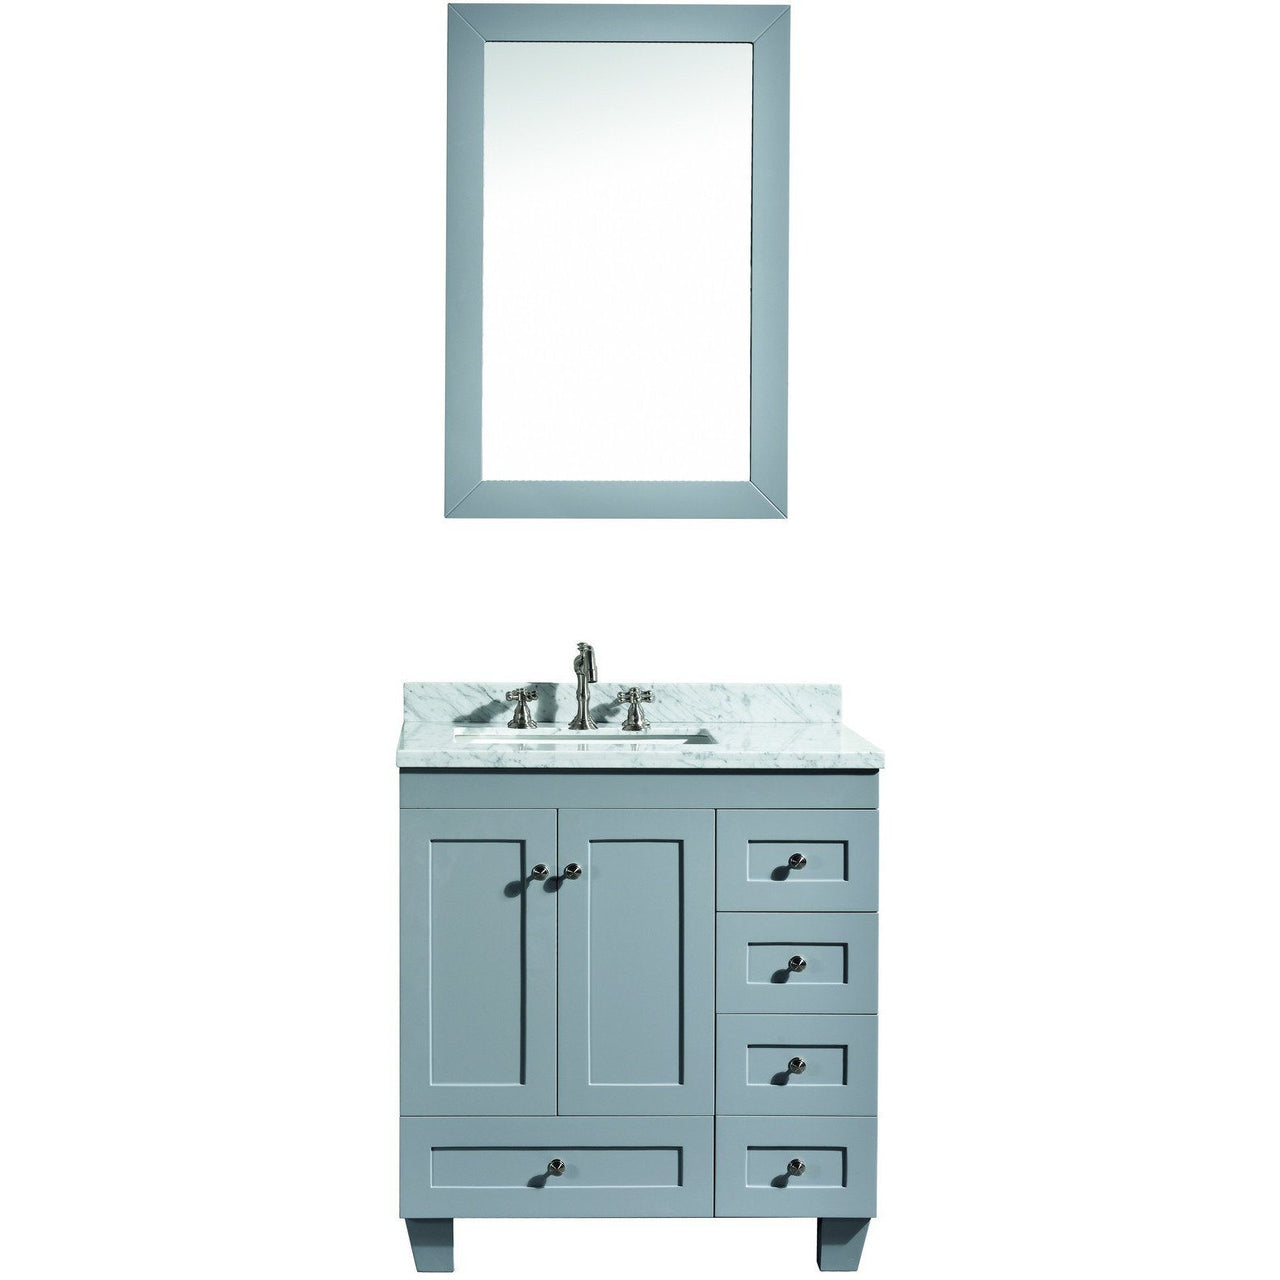 Eviva Acclaim C. 30" Transitional Grey Vanity with white carrera marble counter-top Vanity Eviva 